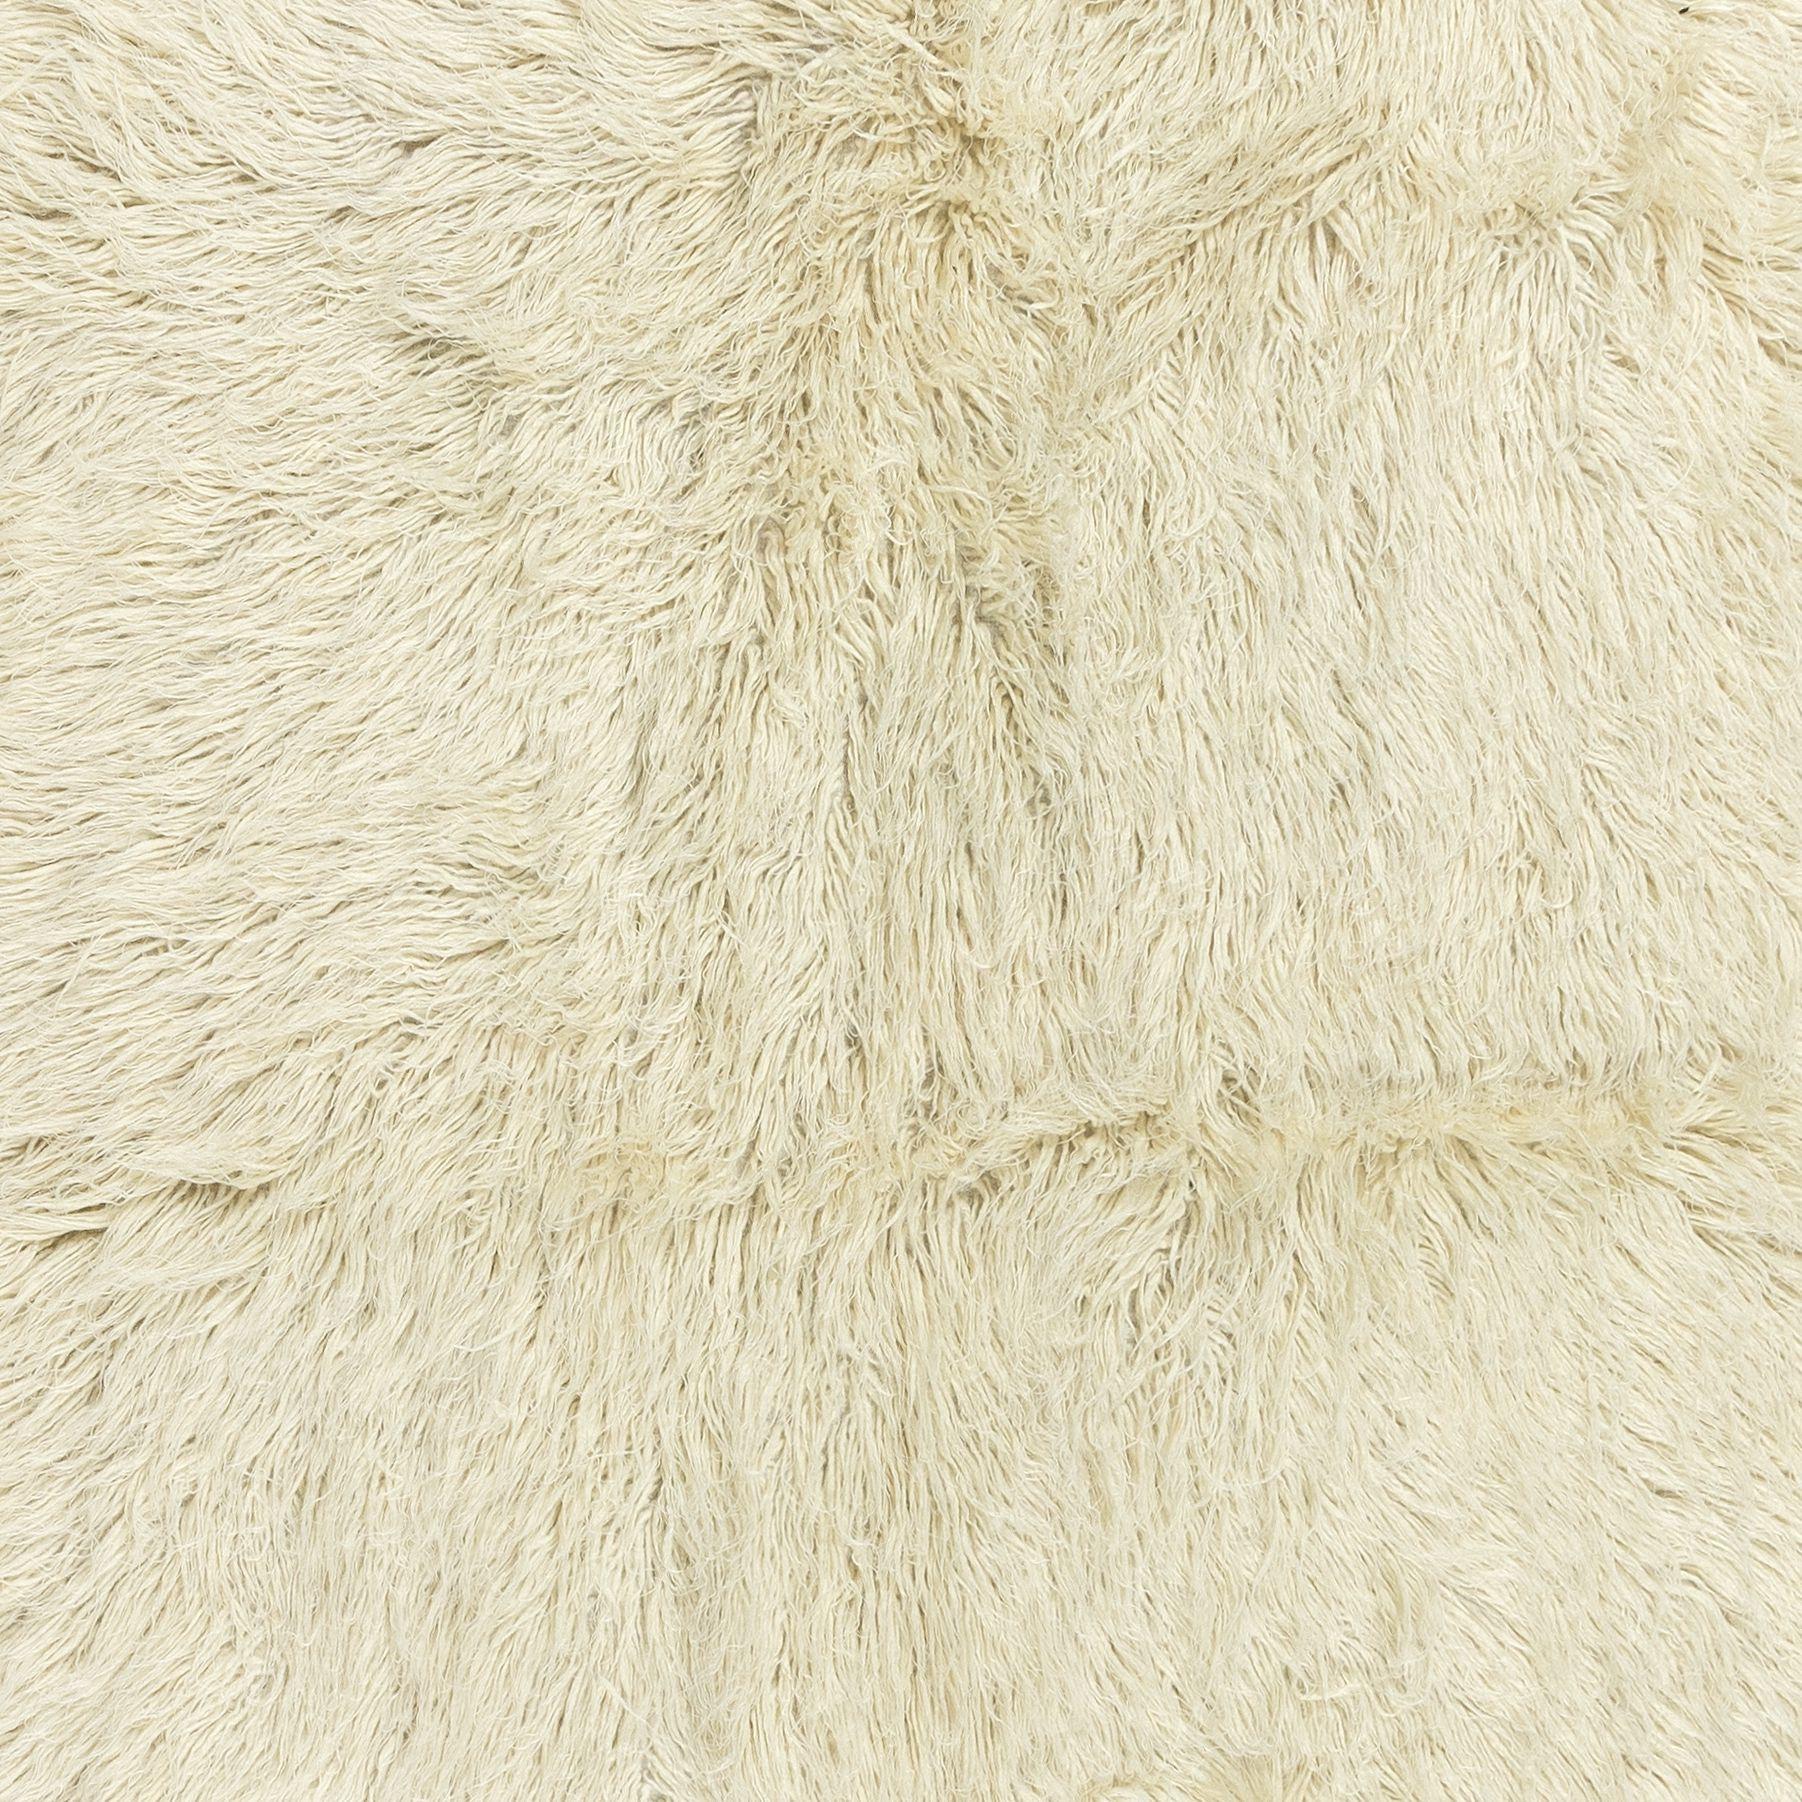 Turkish 5x8.3 Ft Vintage Handmade Shaggy Accent Rug Made of Natural Mohair Wool For Sale